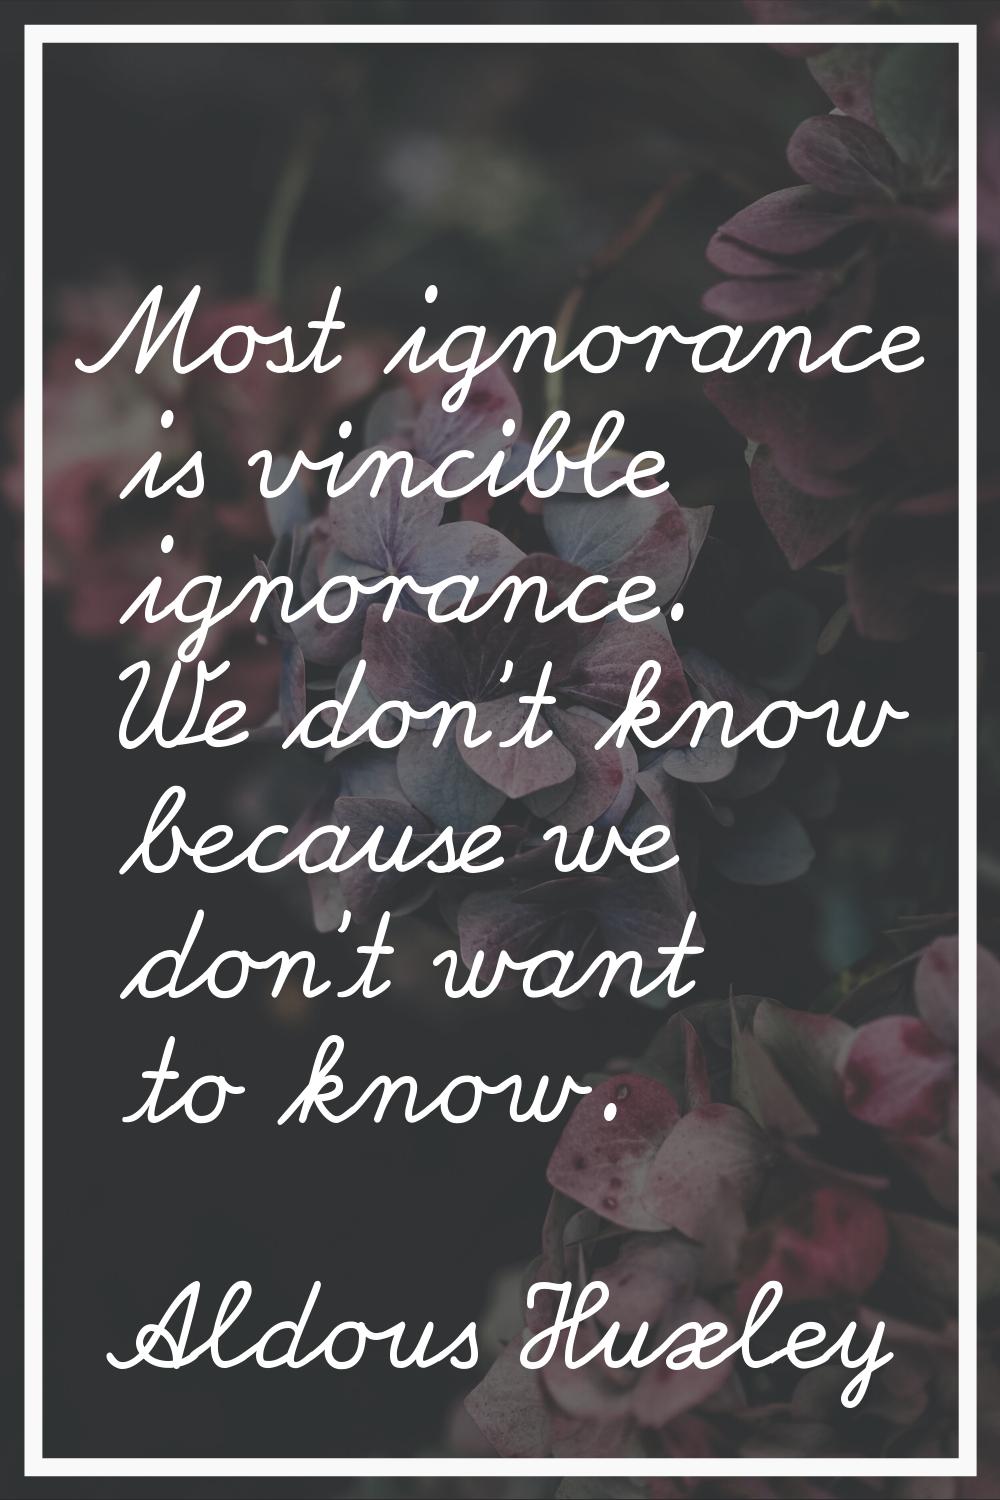 Most ignorance is vincible ignorance. We don't know because we don't want to know.